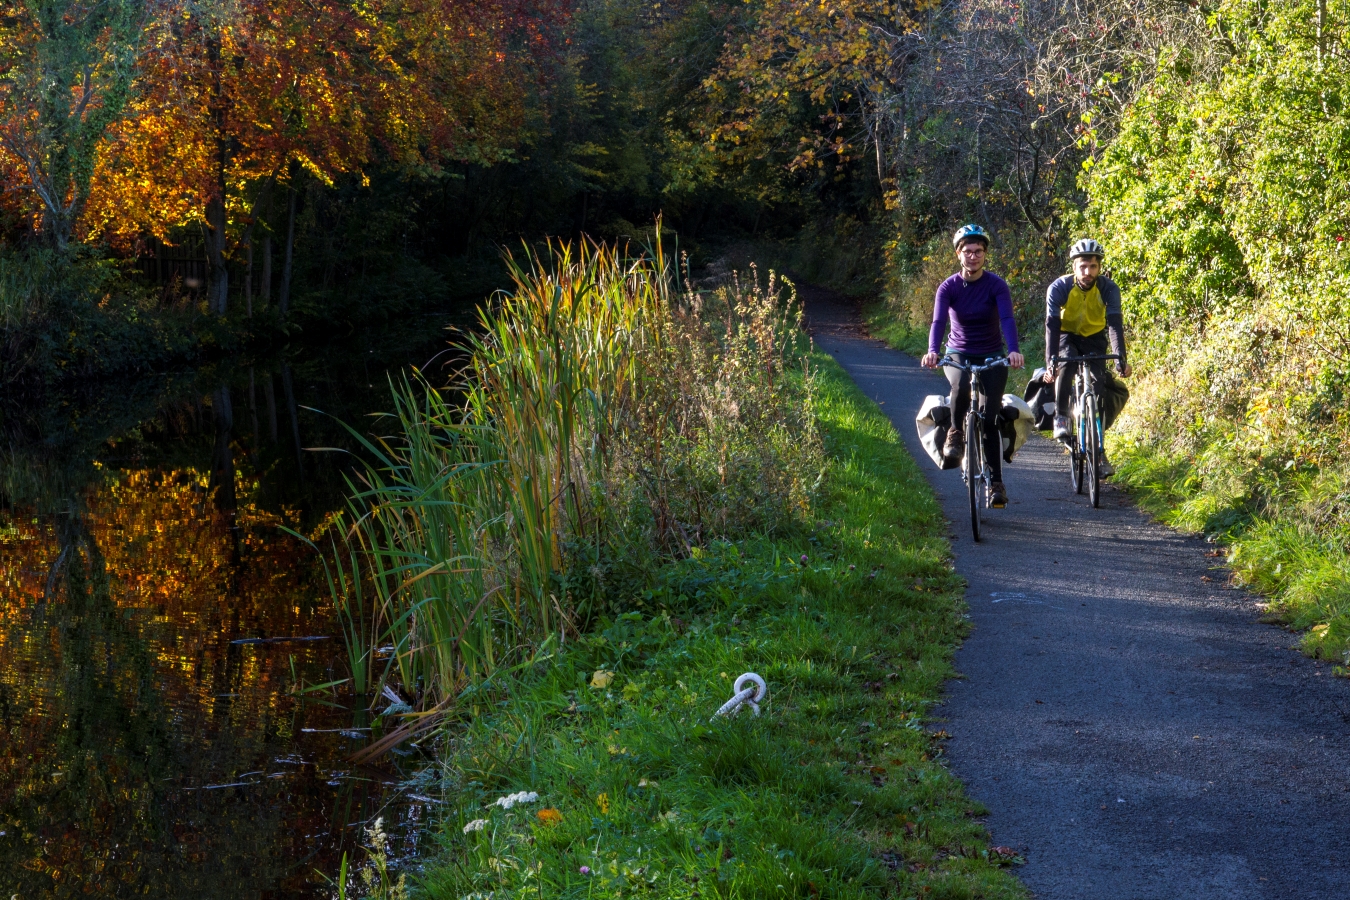 S5 Union Canal cyclists